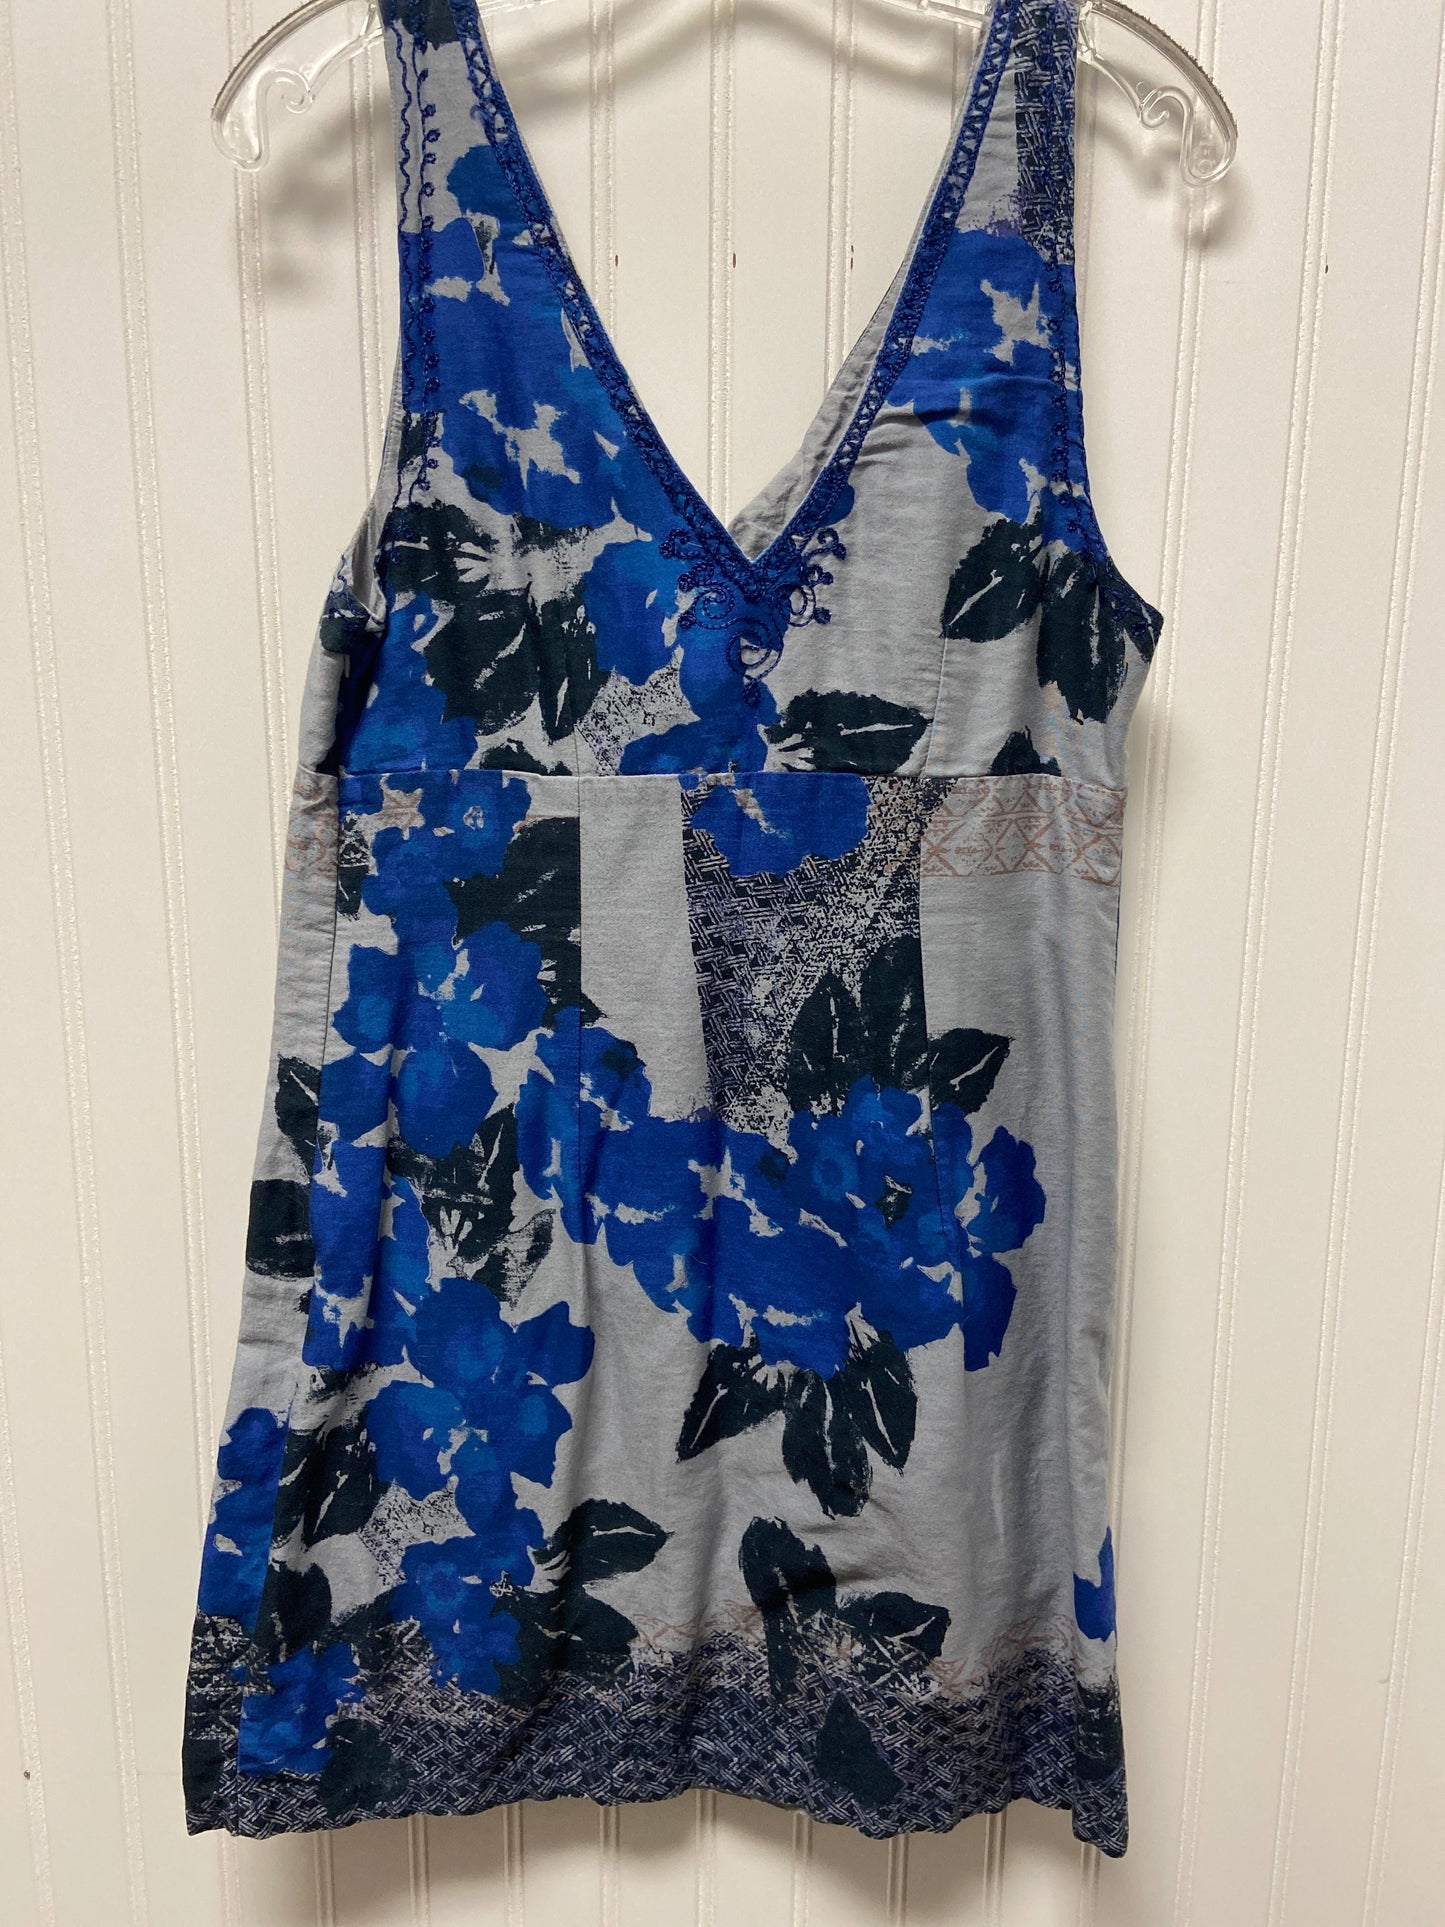 Black & Blue Dress Casual Short Free People, Size 8